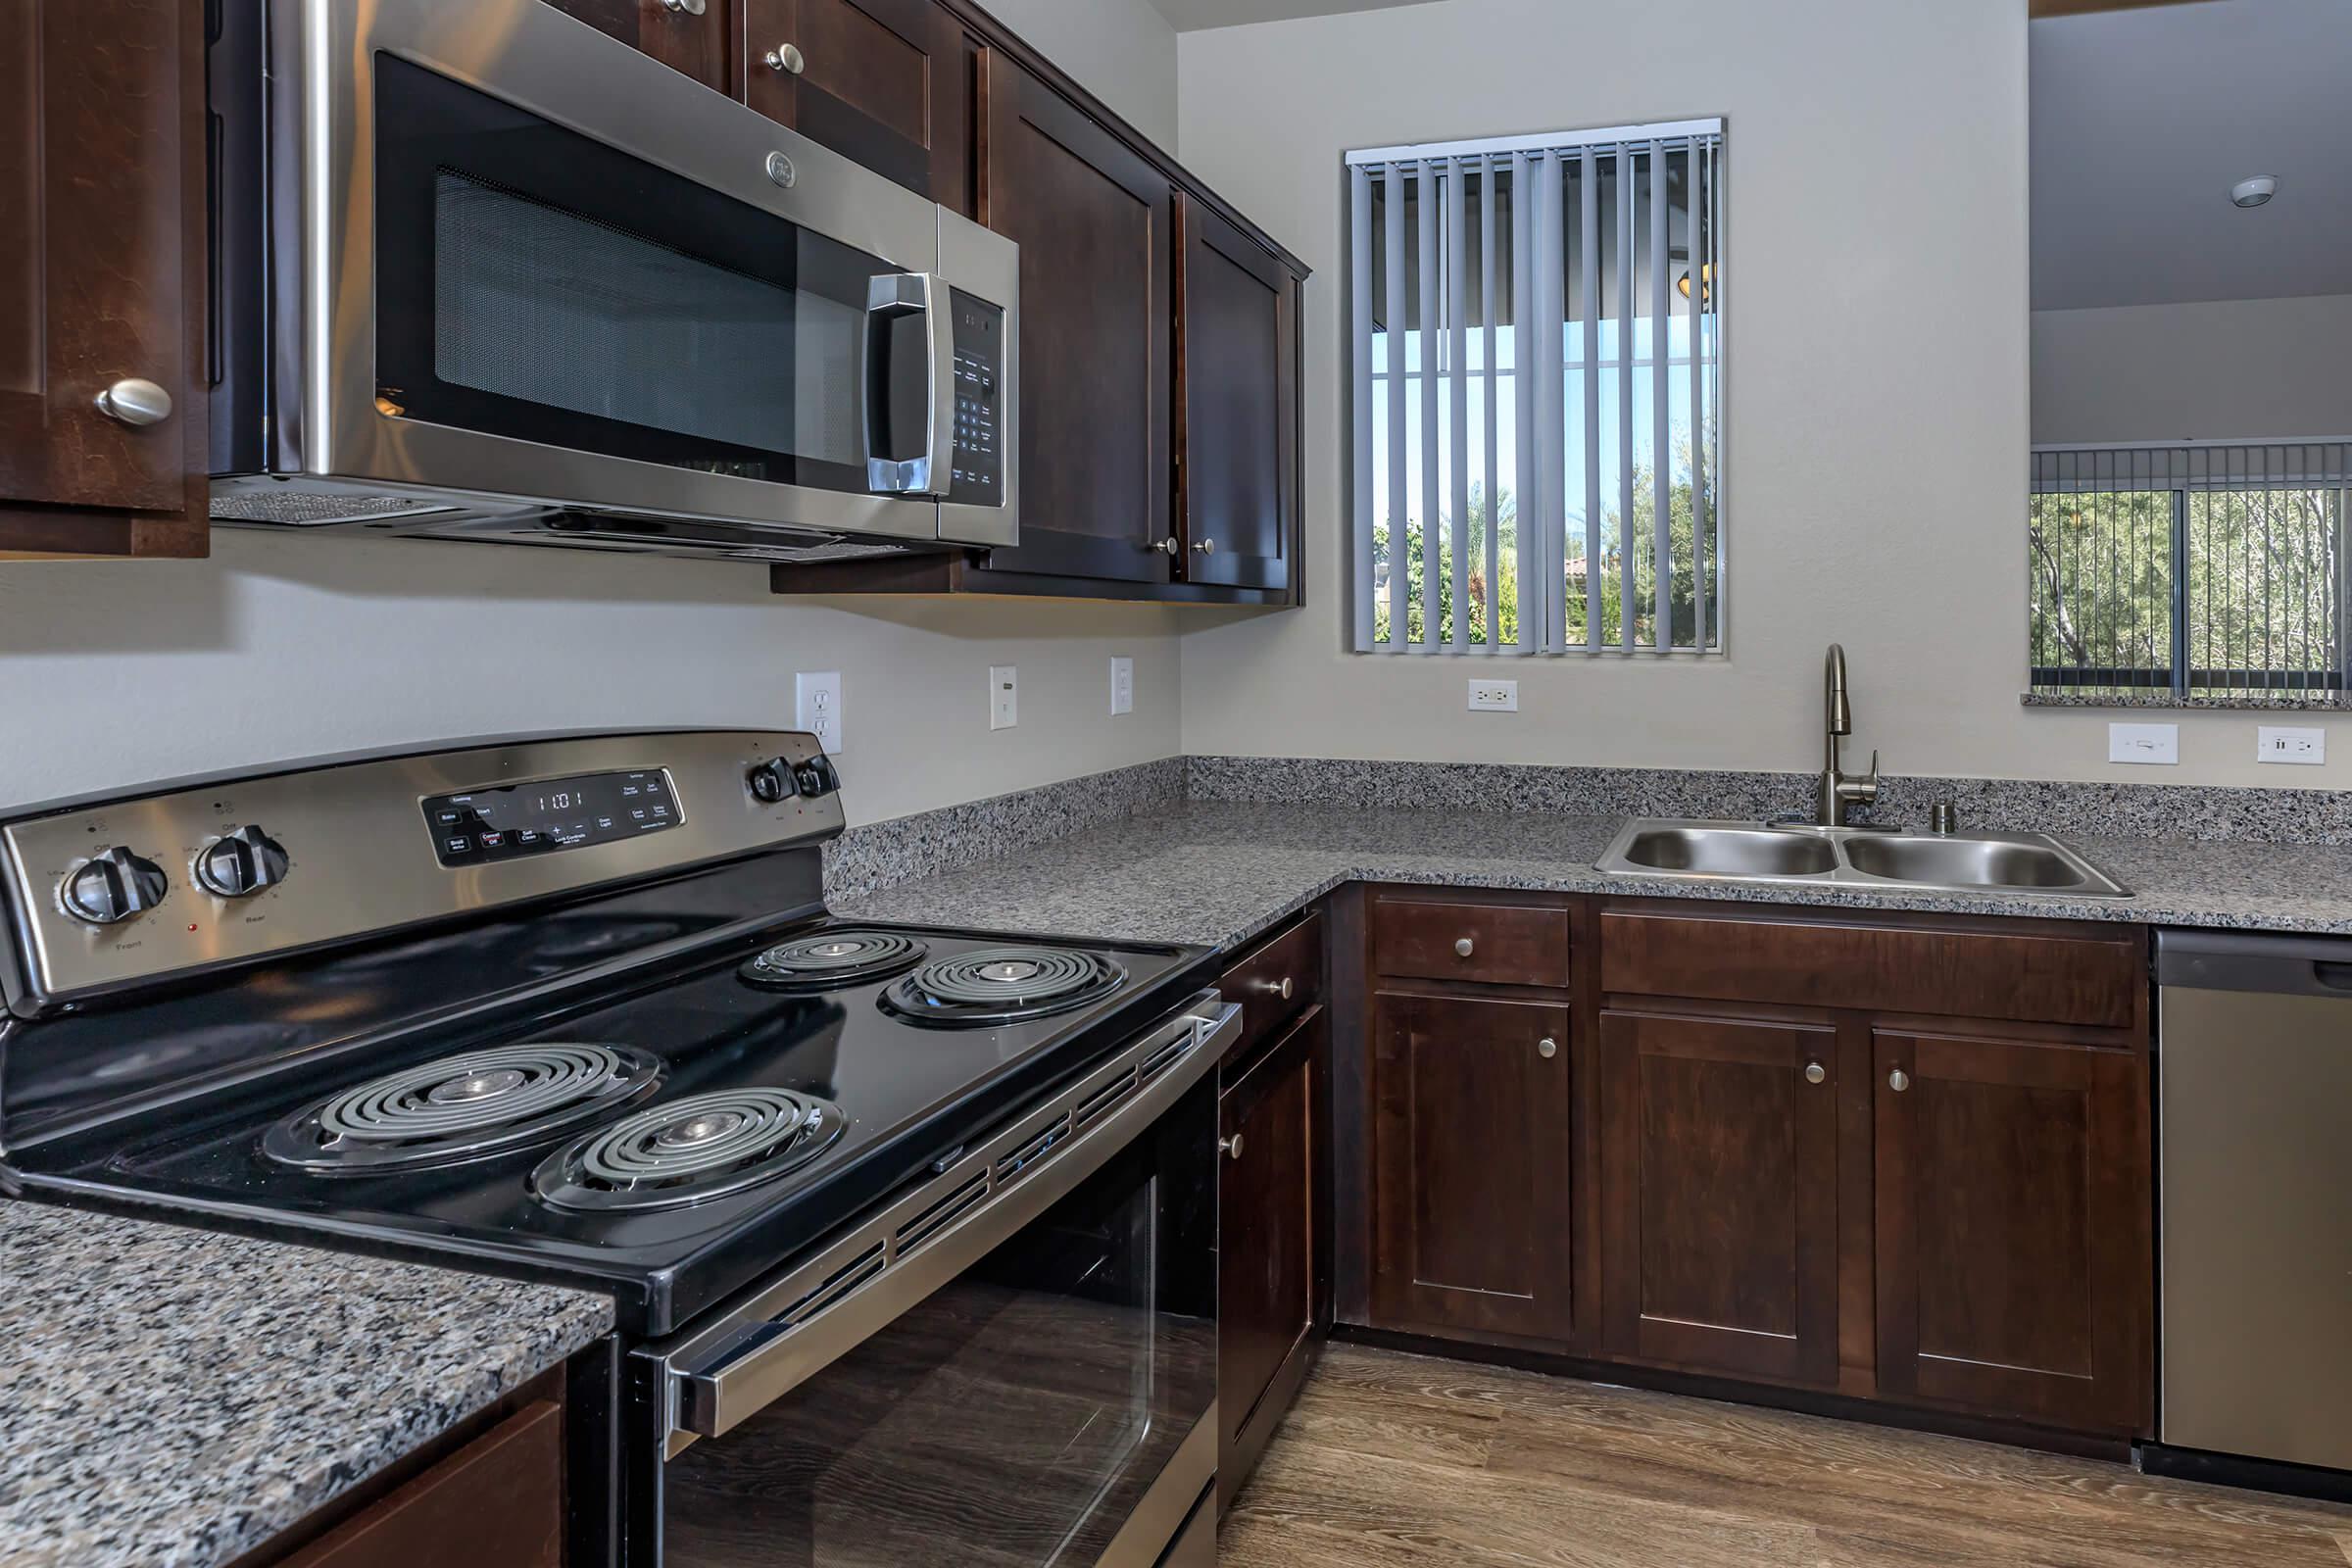 WELL-EQUIPPED KITCHENS FOR RENT IN LAS VEGAS, NV